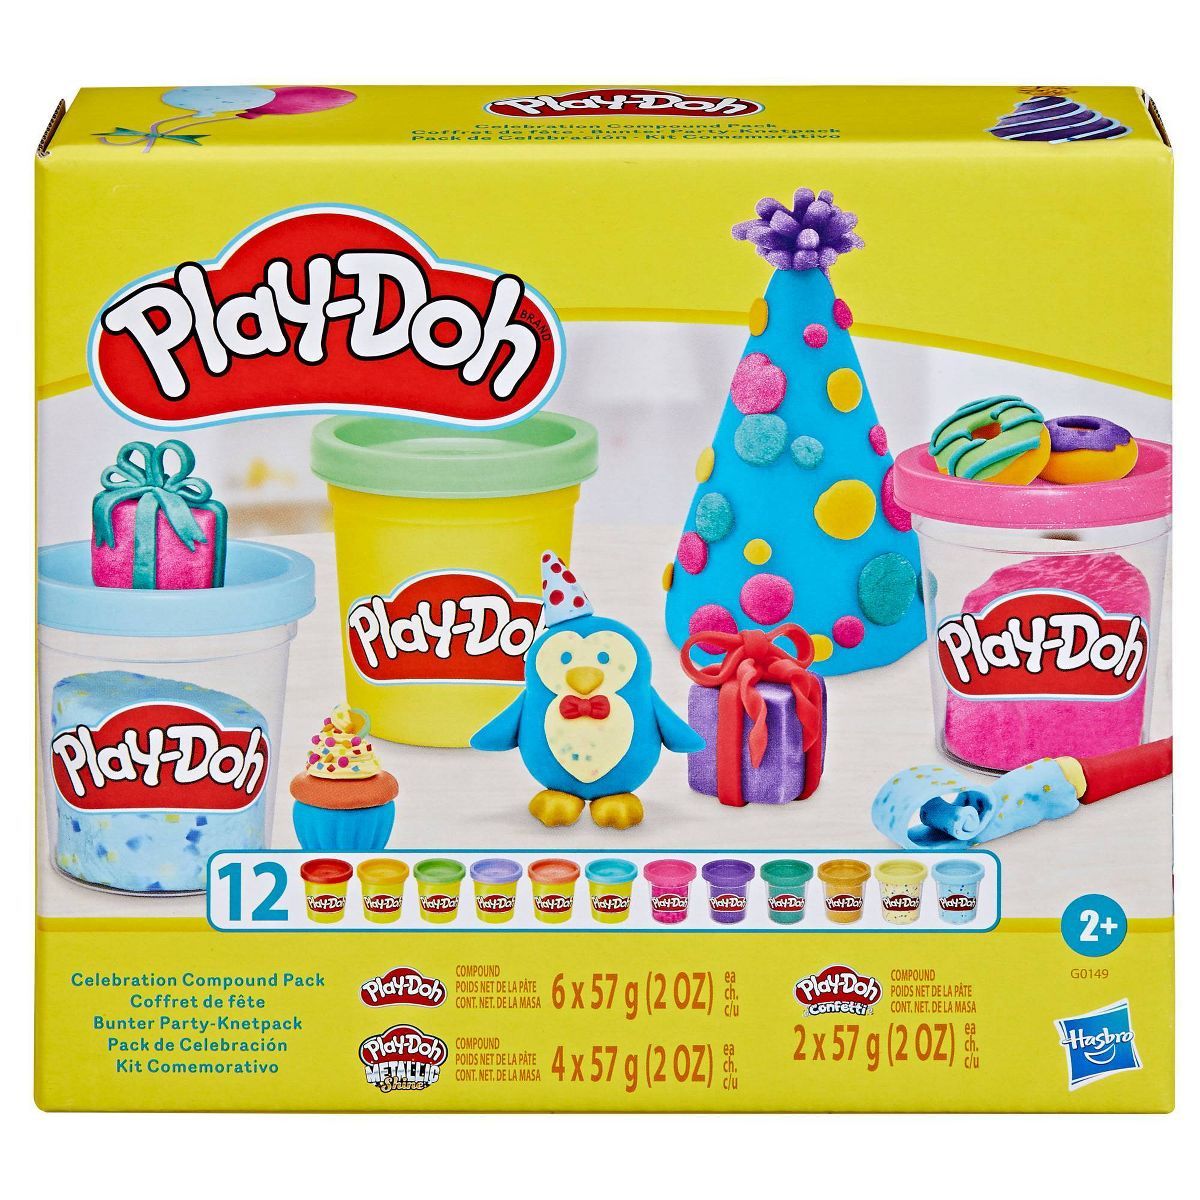 Play-Doh Celebration Compound Pack | Target